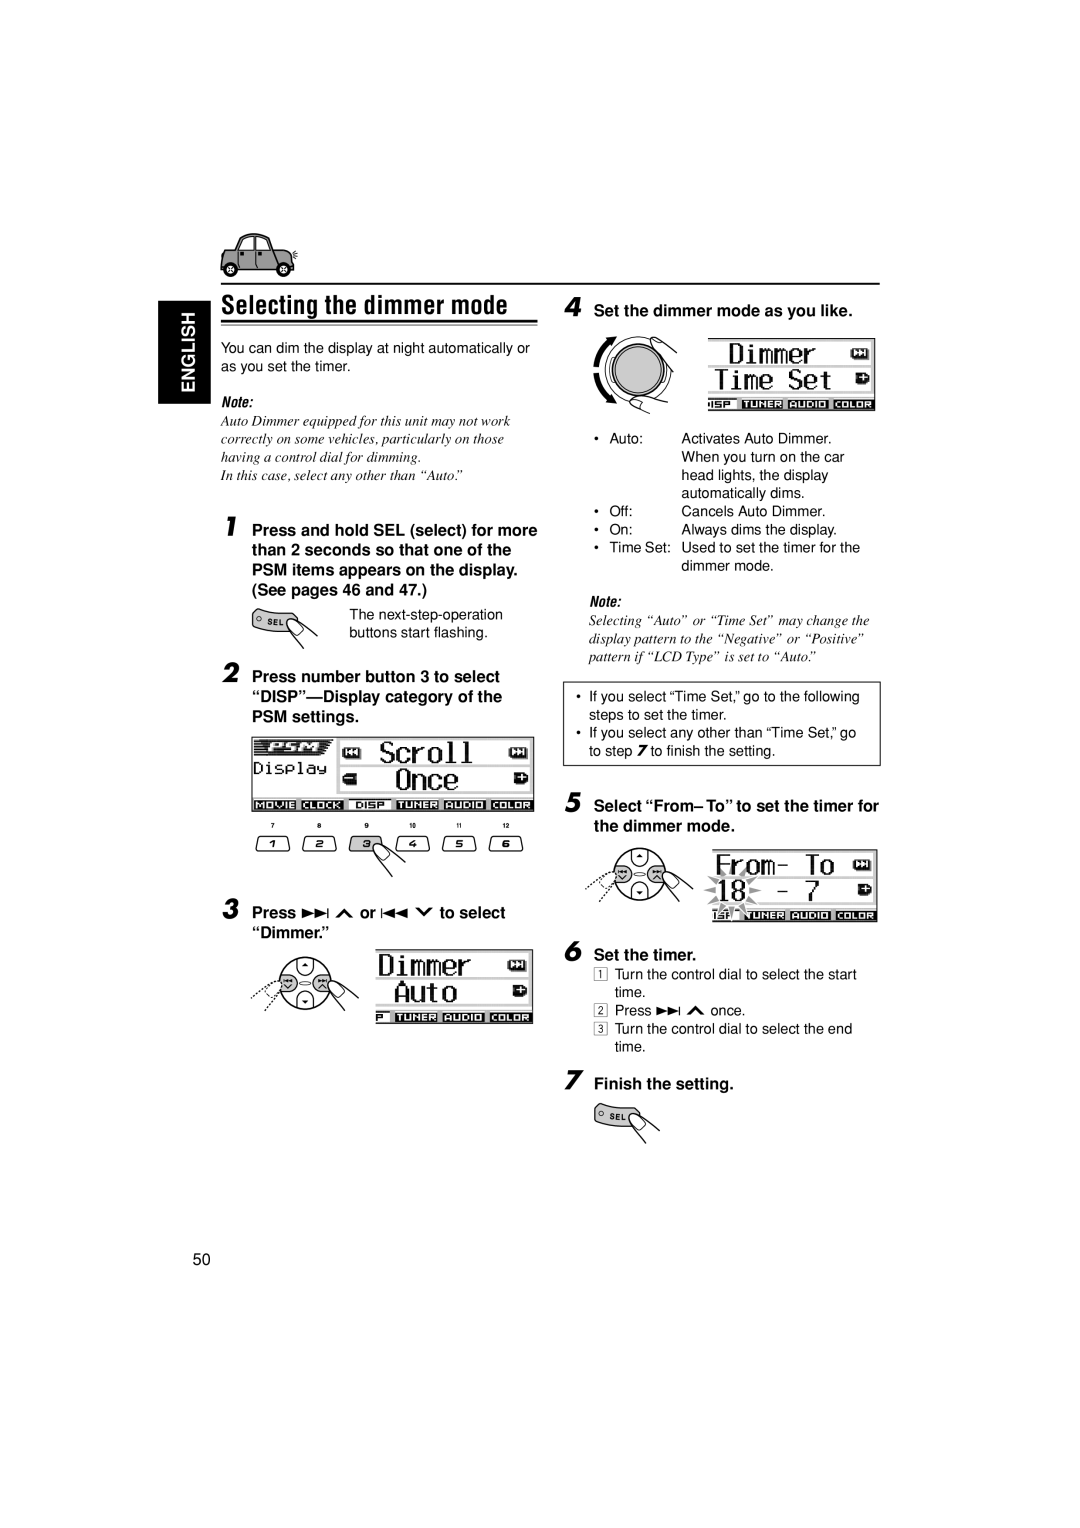 JVC KD-LH401 service manual Selecting the dimmer mode, Set the dimmer mode as you like, English, Finish the setting 